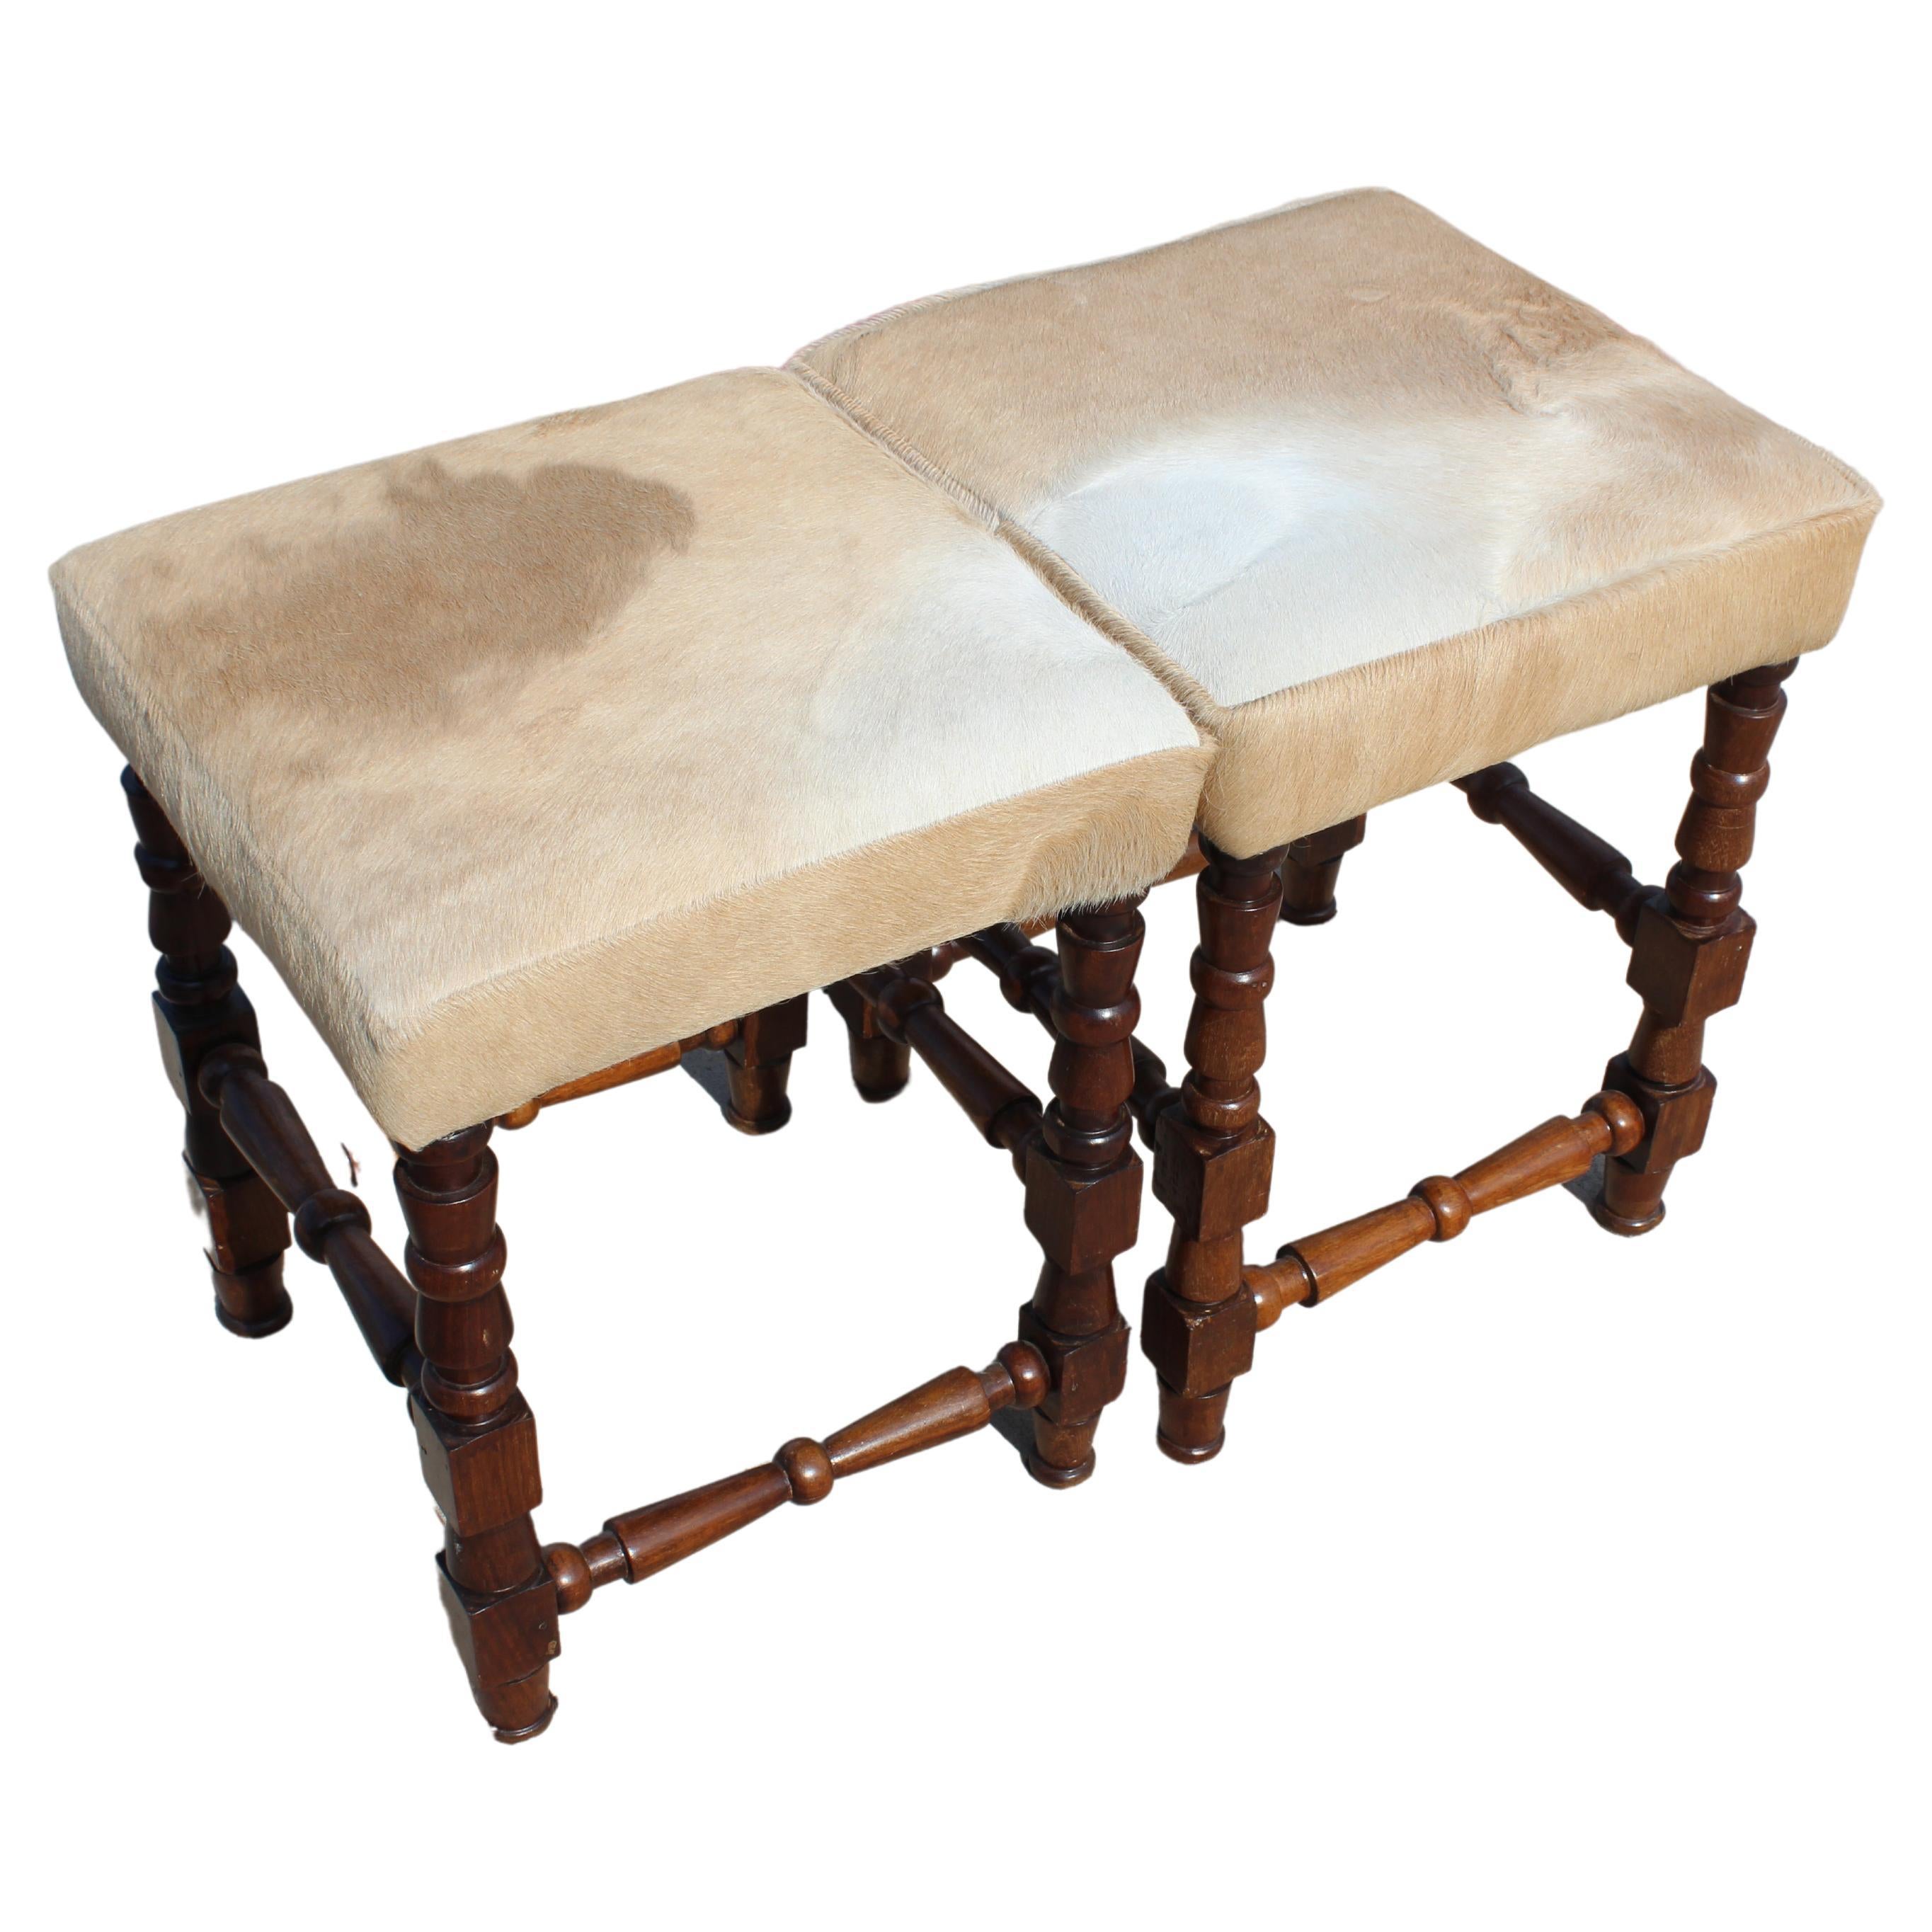 Carved French footstool, newly upholstered in a cowhide. For Sale